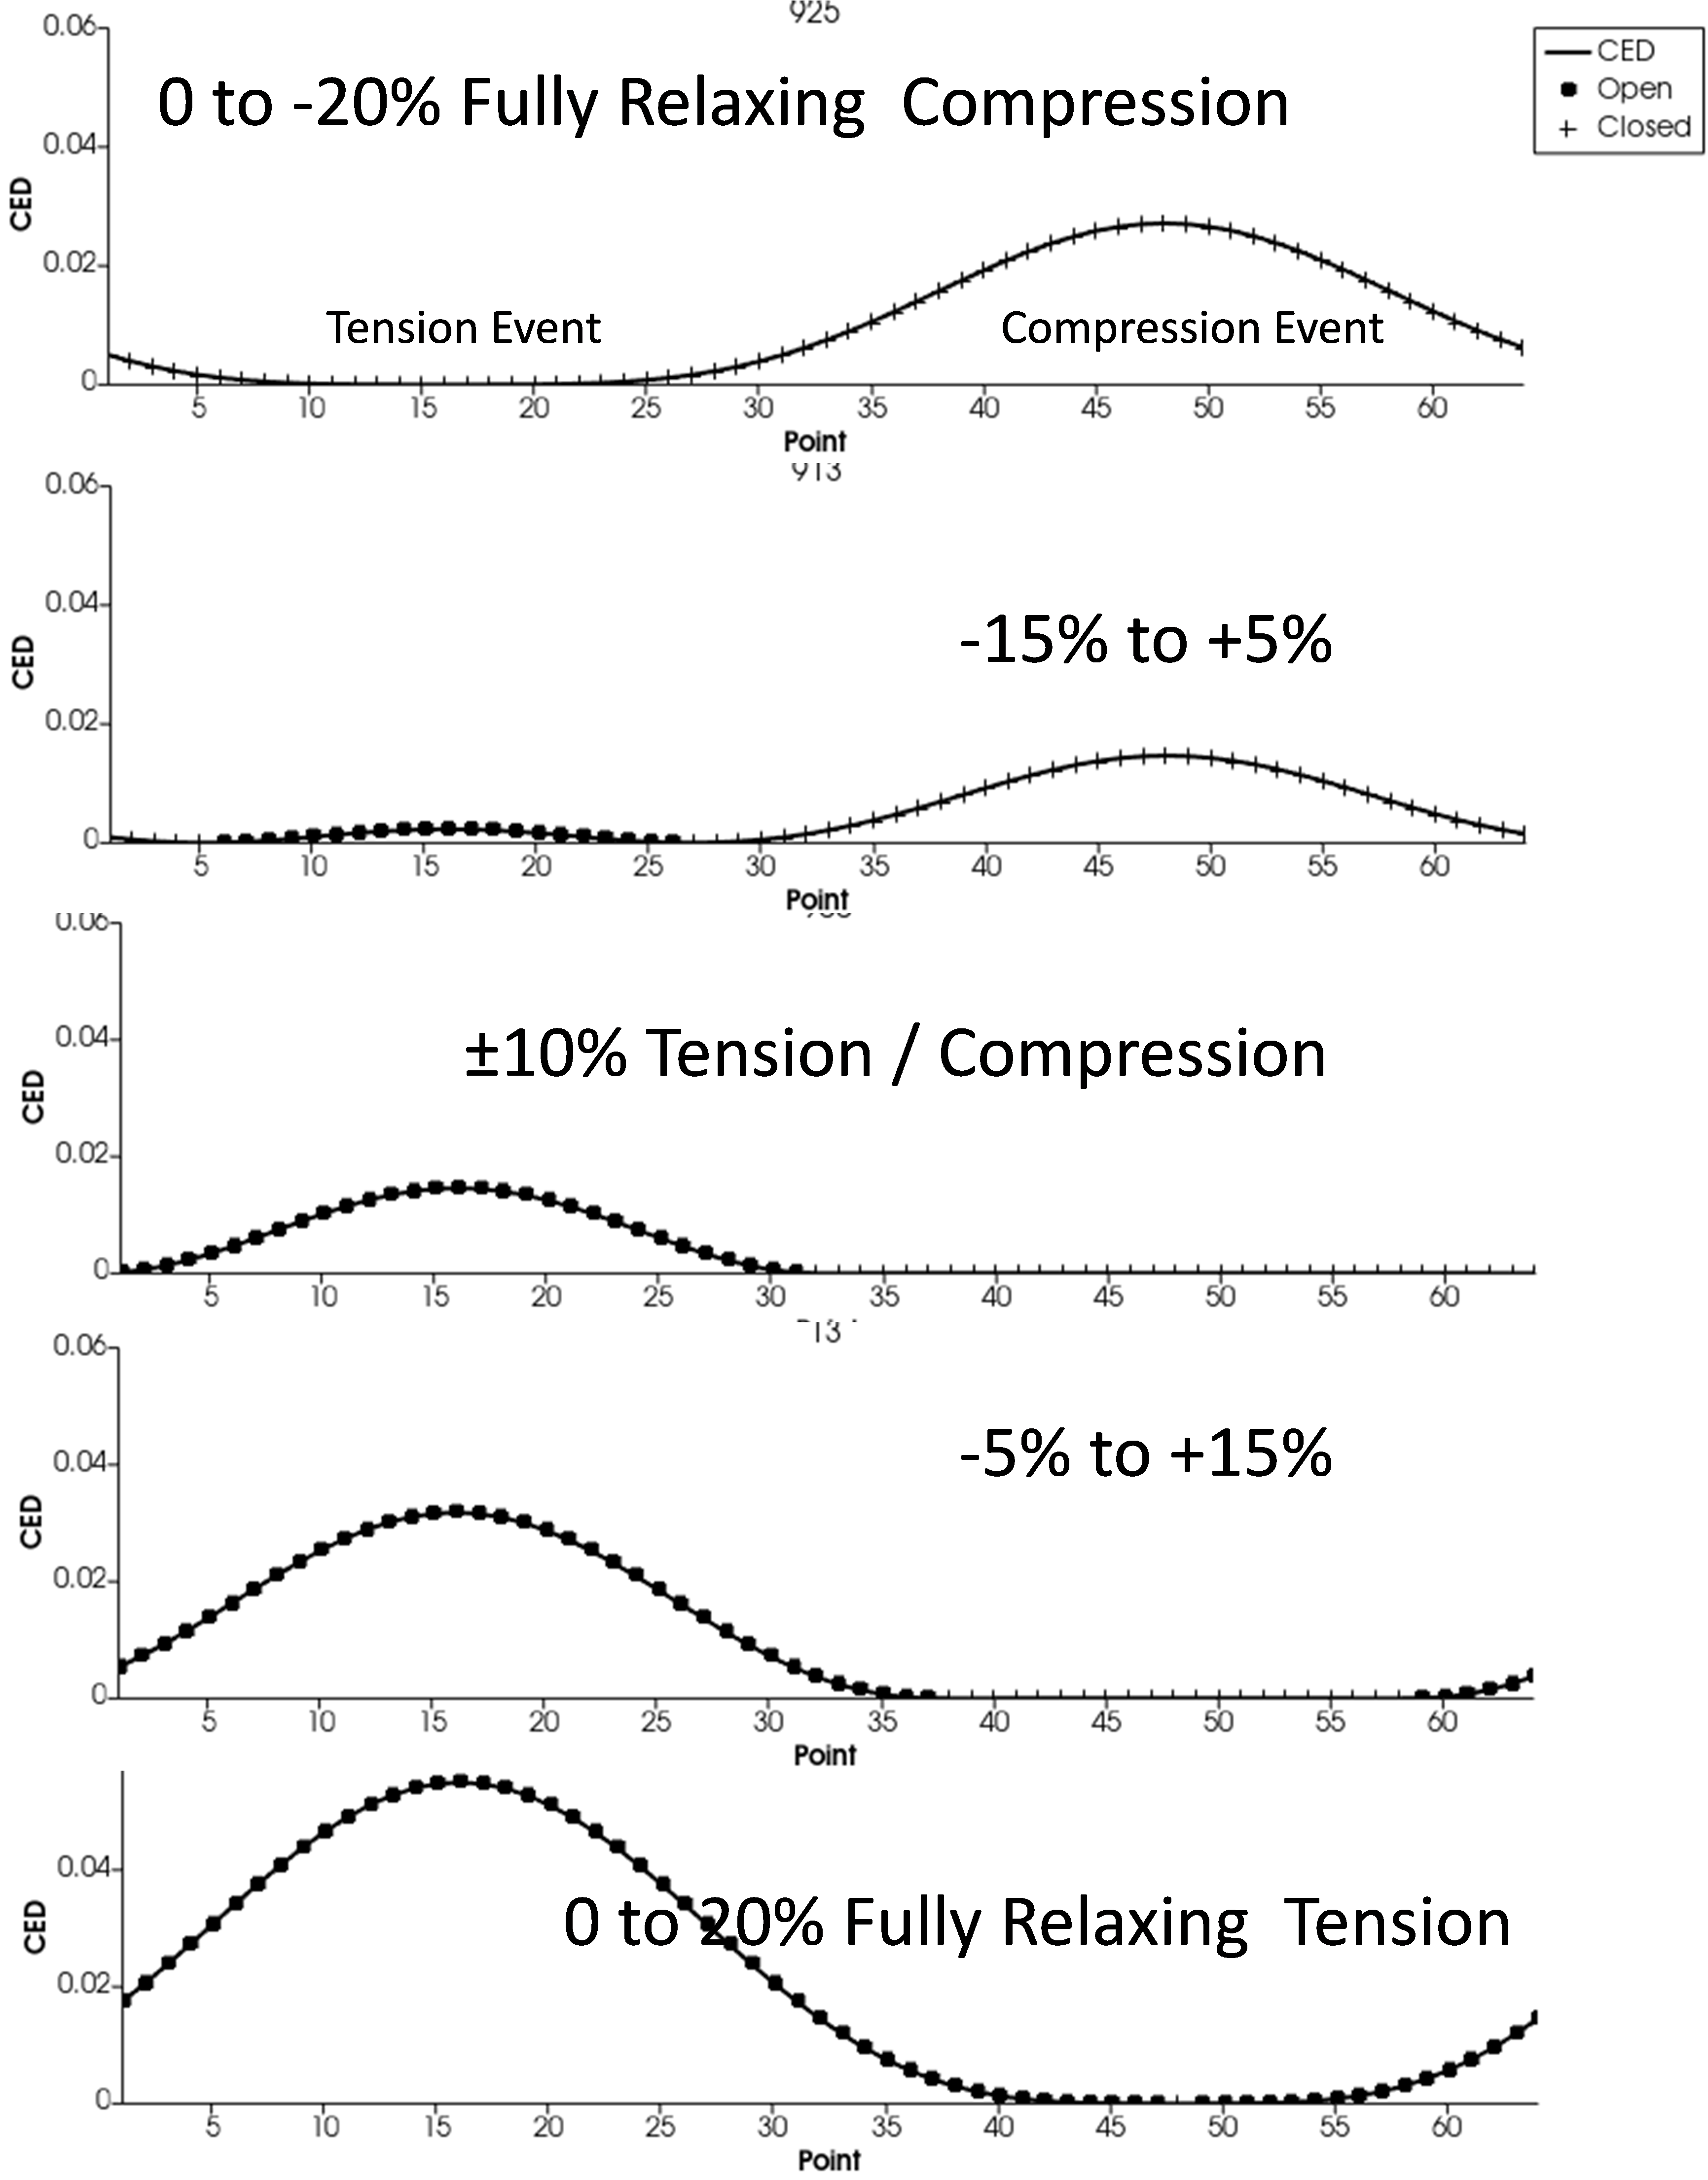 Graphs showing the cracking energy density as a function of time on the critical plane. Fully reversed tension/compression is really R=0 when viewed in terms of tearing energy.